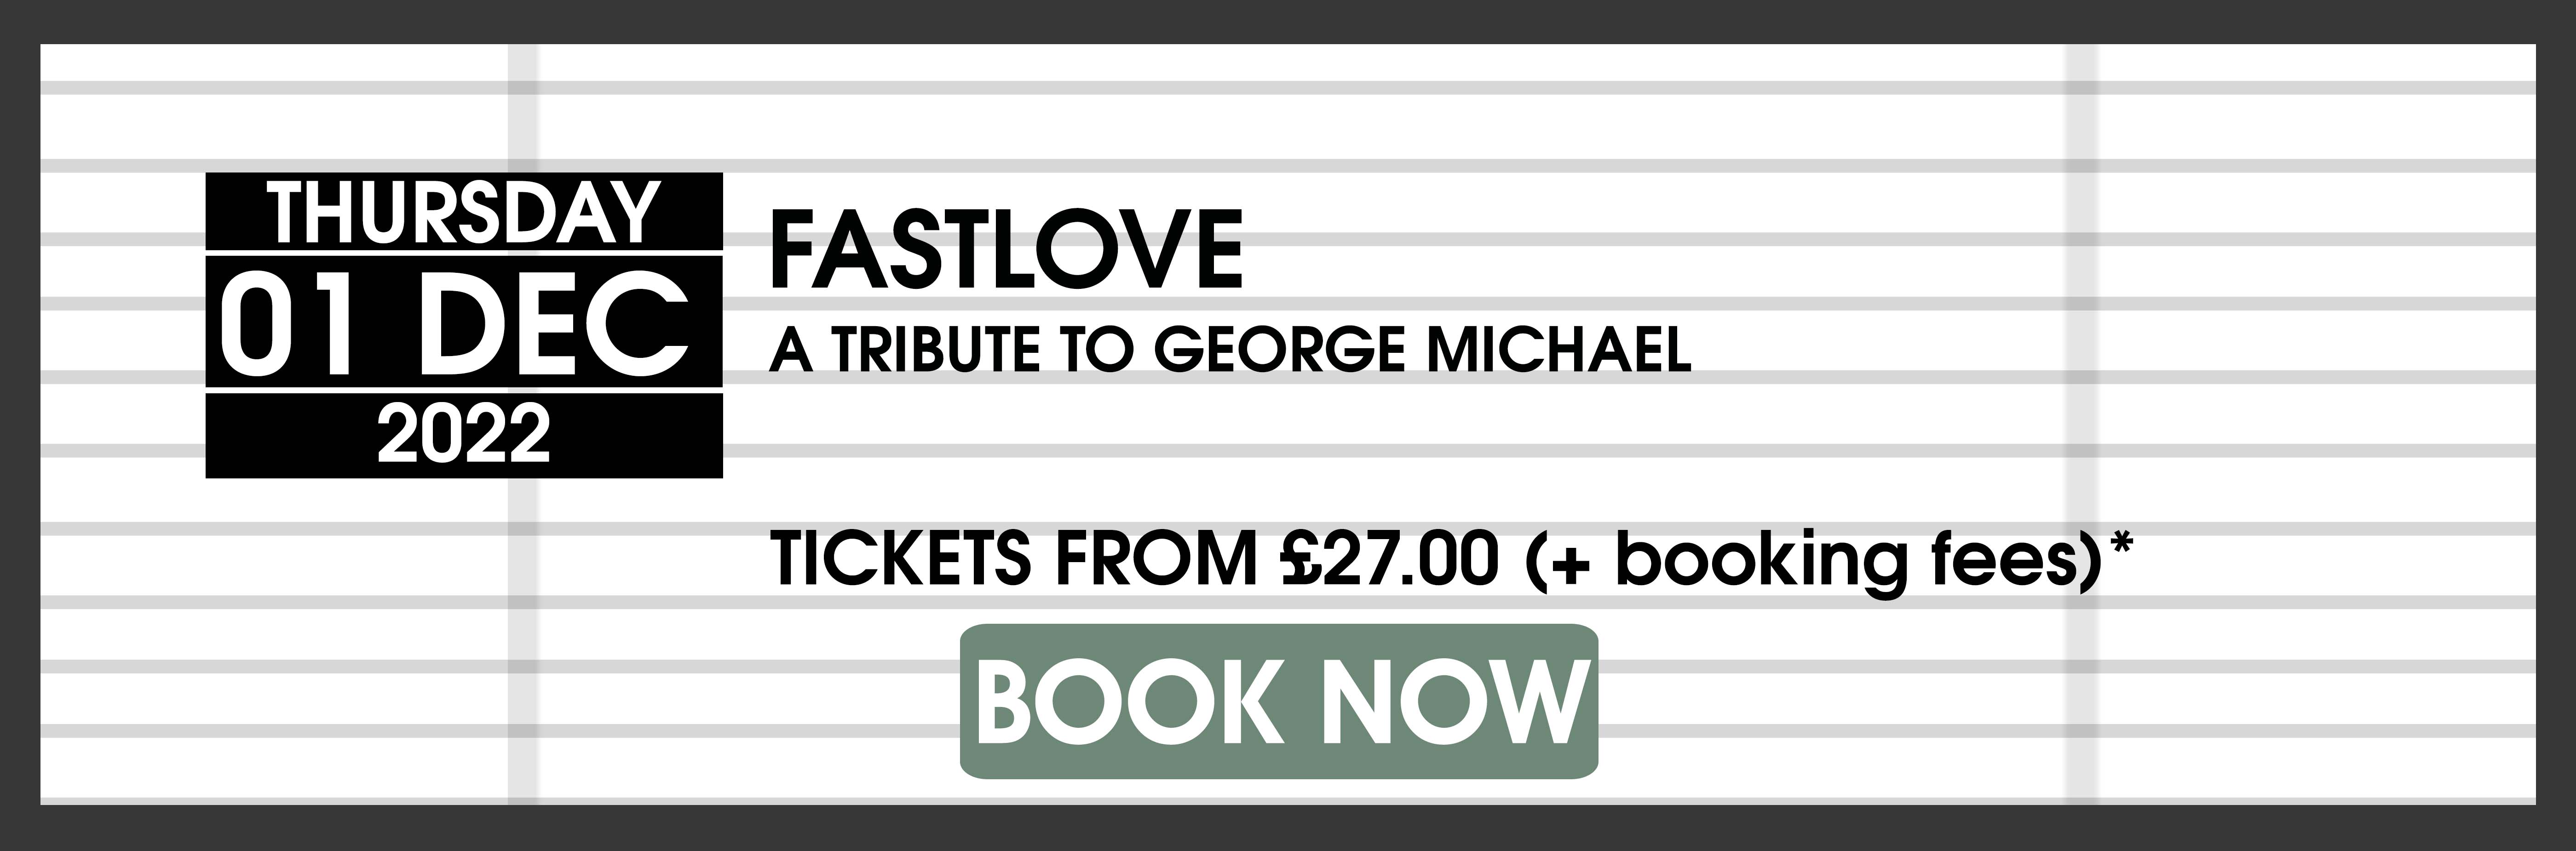 01012.22 FASTLOVE BOOK NOW